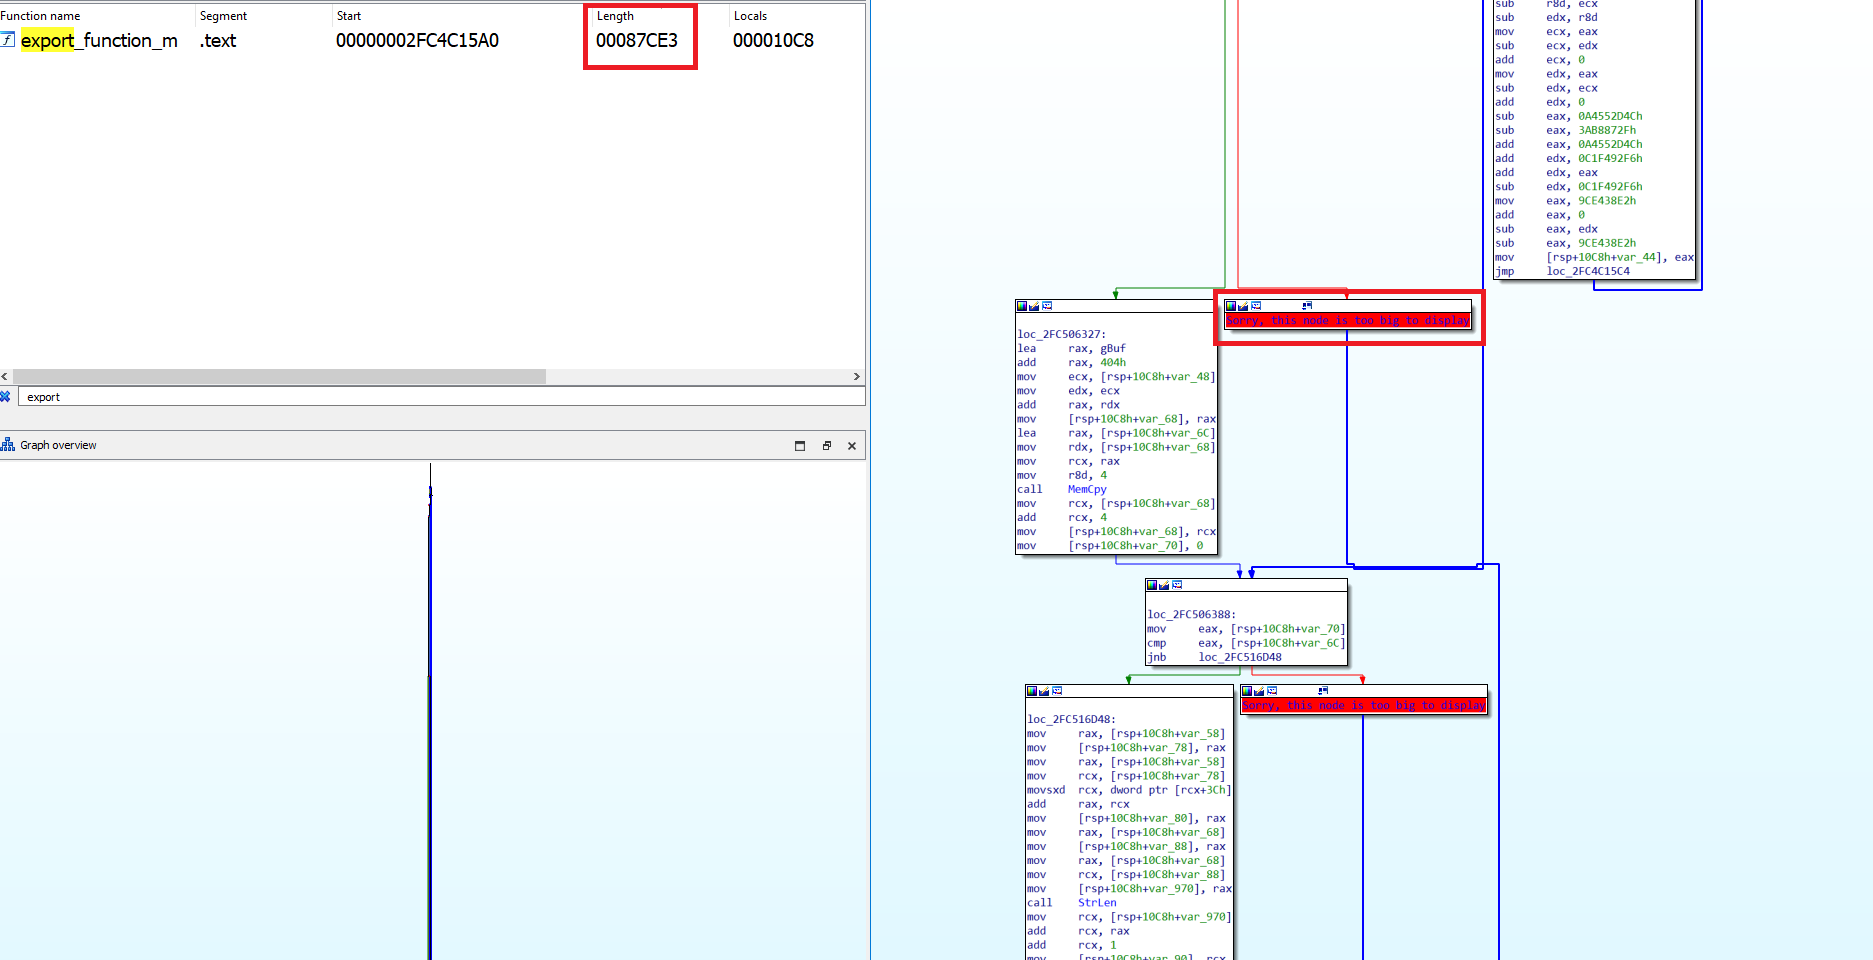 Image 7 is a screenshot of multiple windows of code. Highlighted in red boxes is the notice that the code is too big to display. The length is also highlighted in red box on the top left.